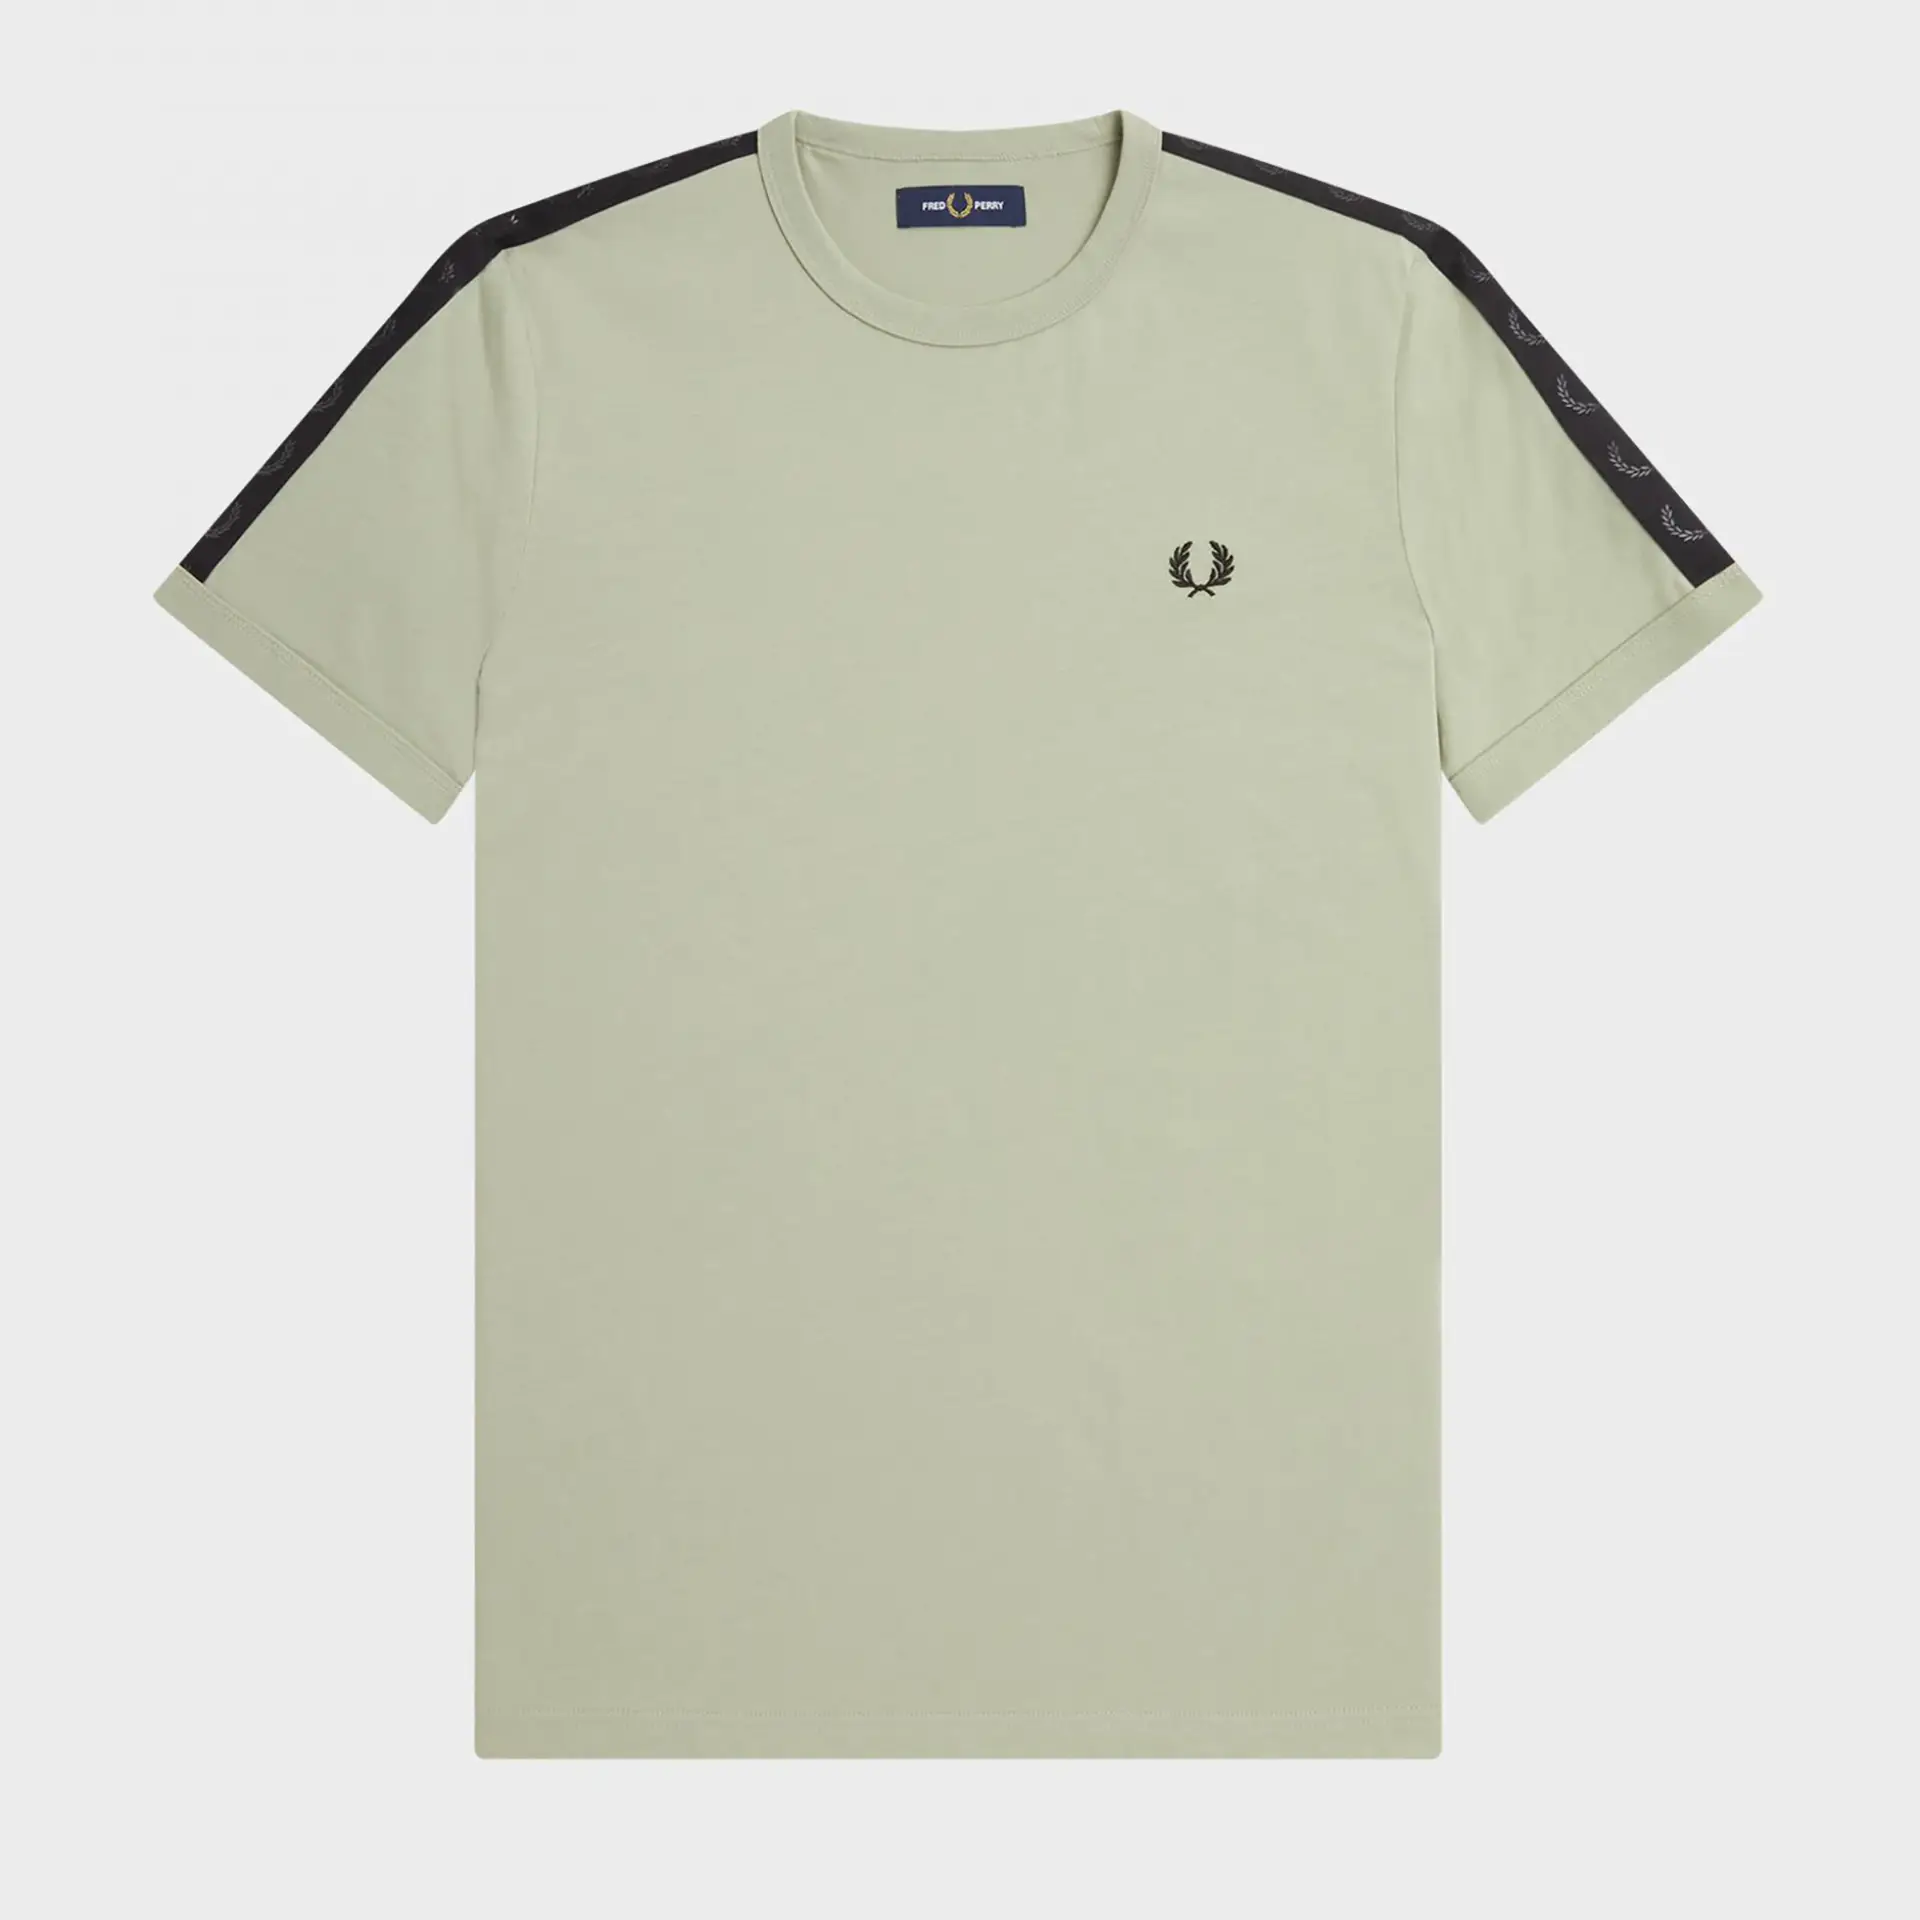 Fred Perry Tonal Tape Ringer T-Shirt Seagrass/Black